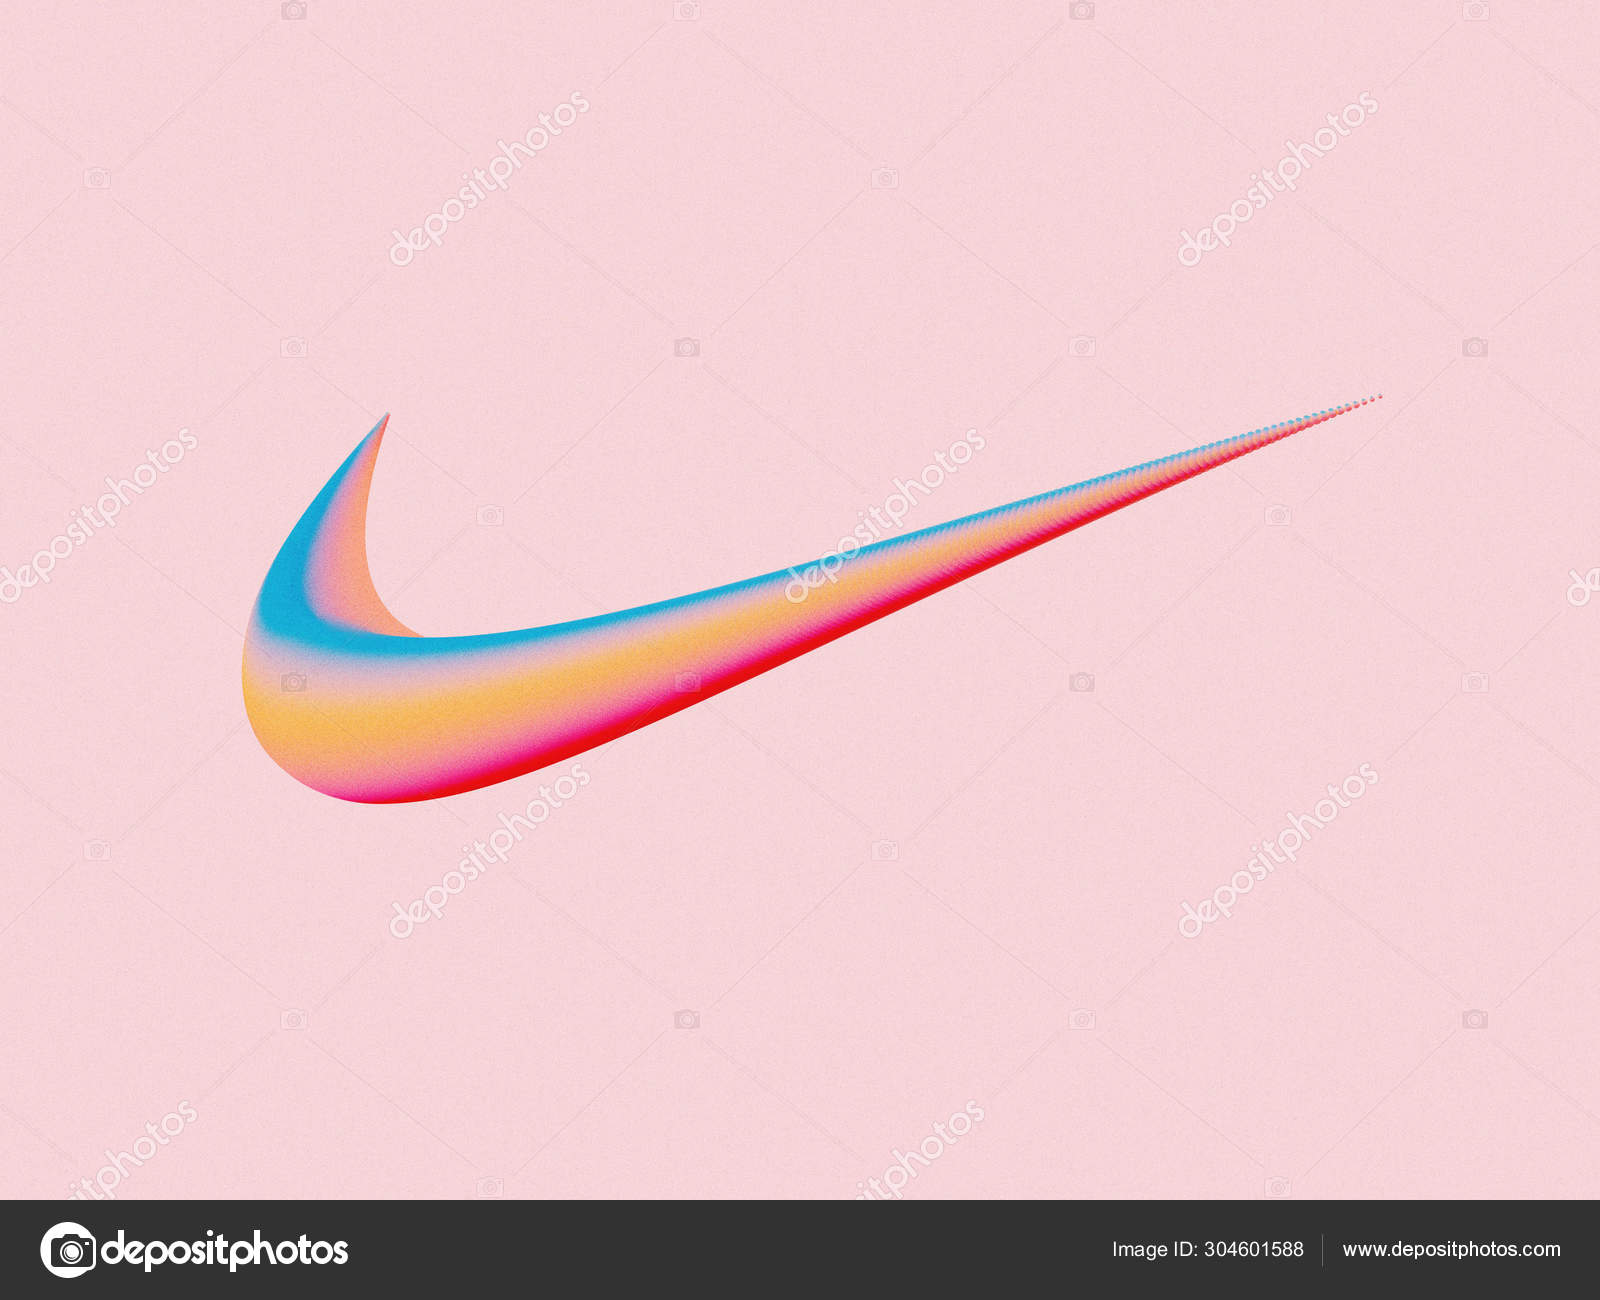 In this photo illustration, a Nike Inc. logo seen displayed on a